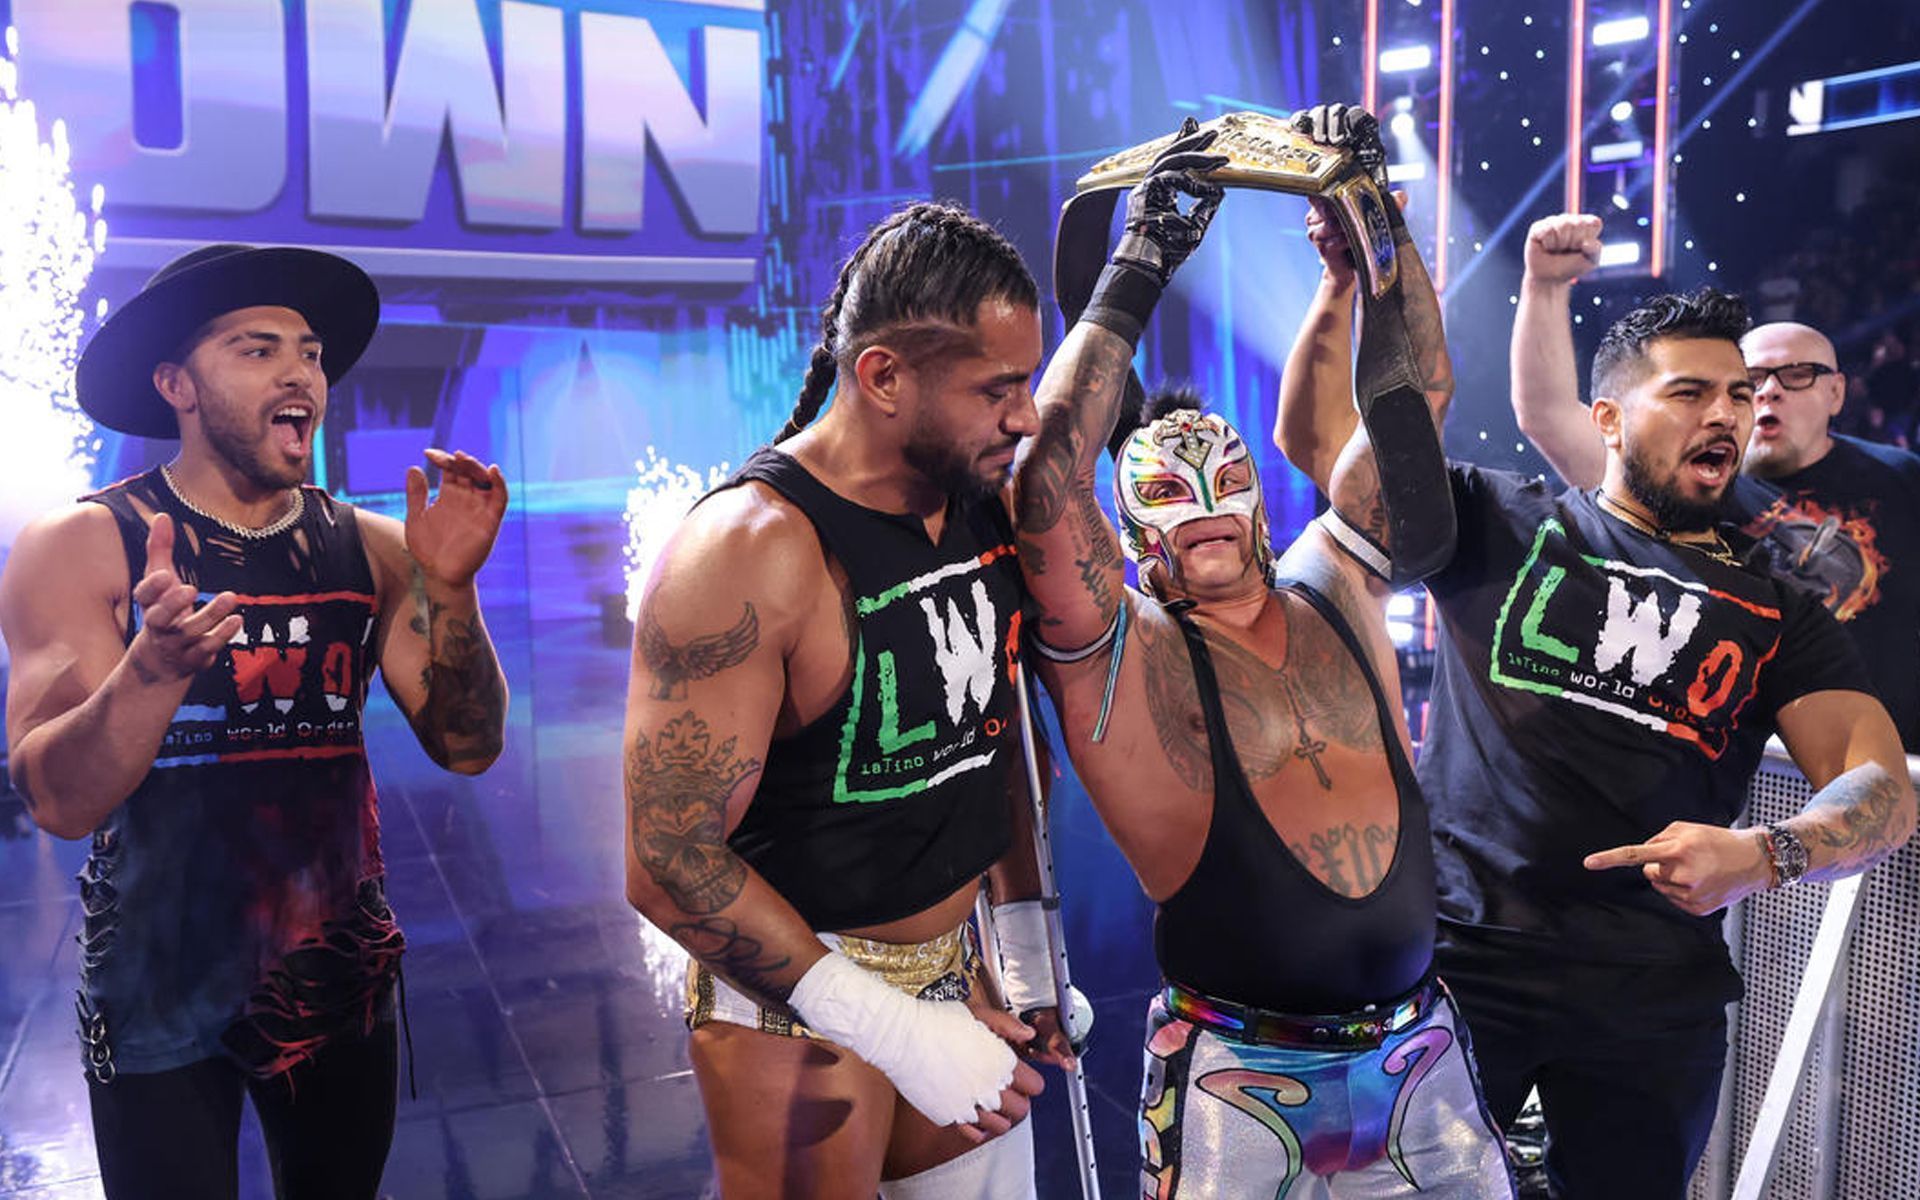 Rey Mysterio captured the United State Championship on a recent edition of SmackDown.